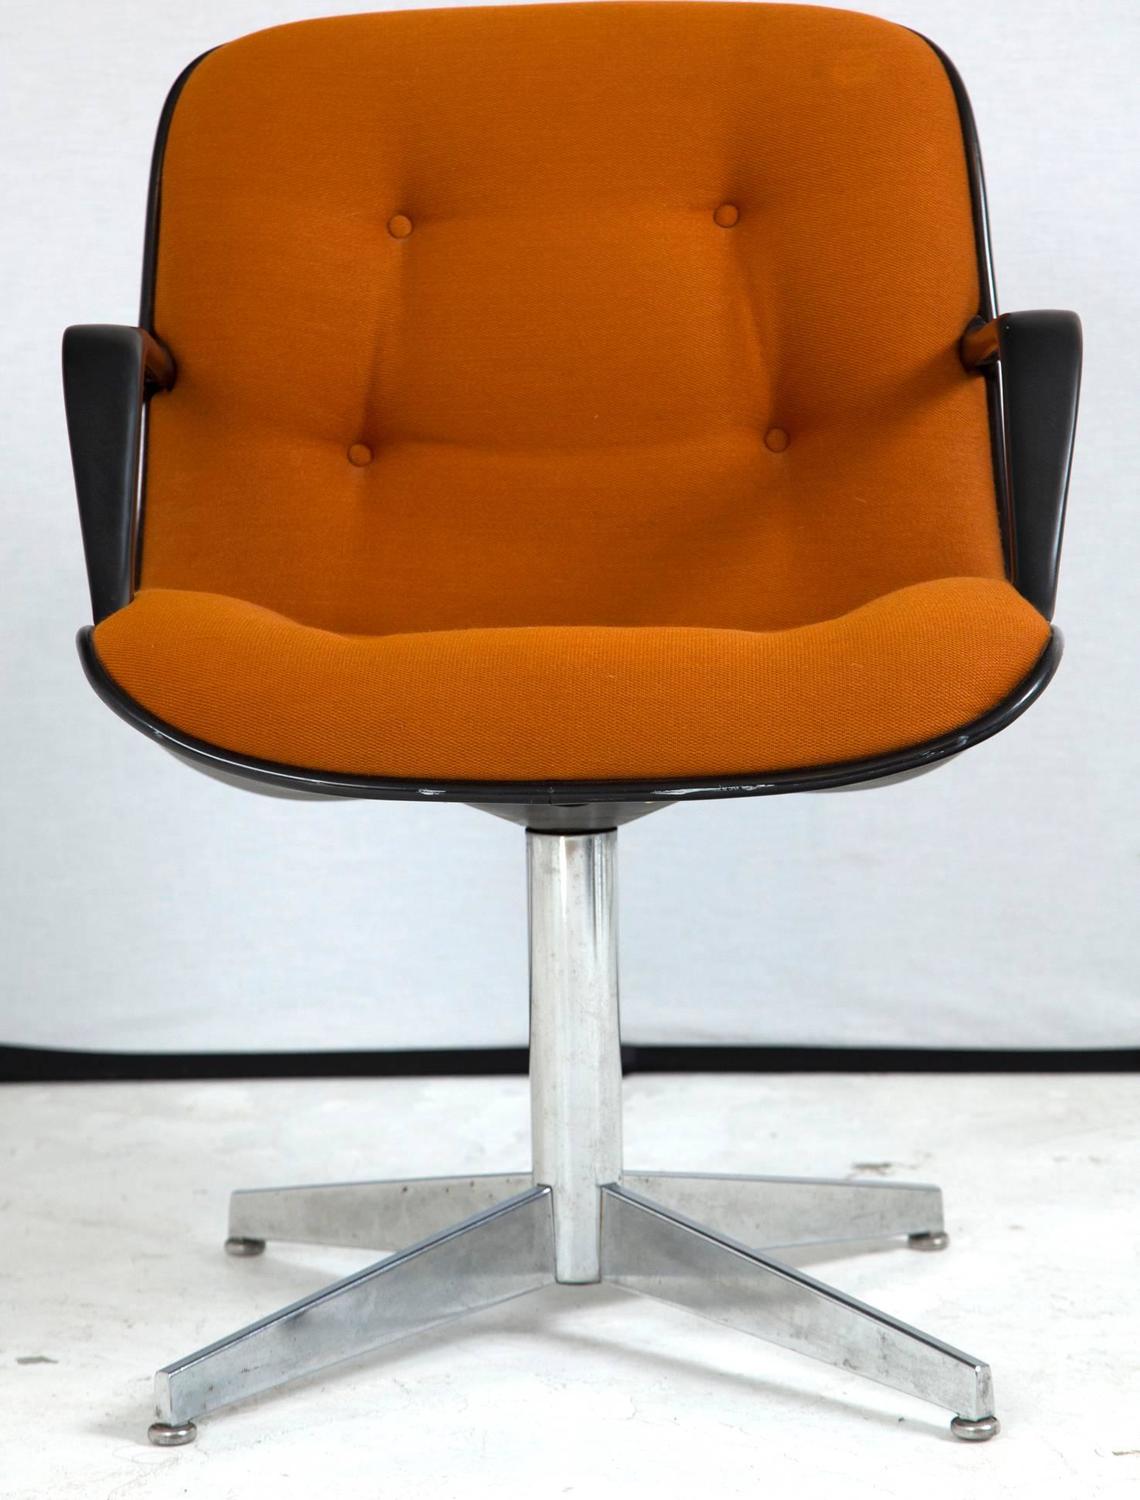 Vintage Steelcase Side Chair For Sale at 1stdibs